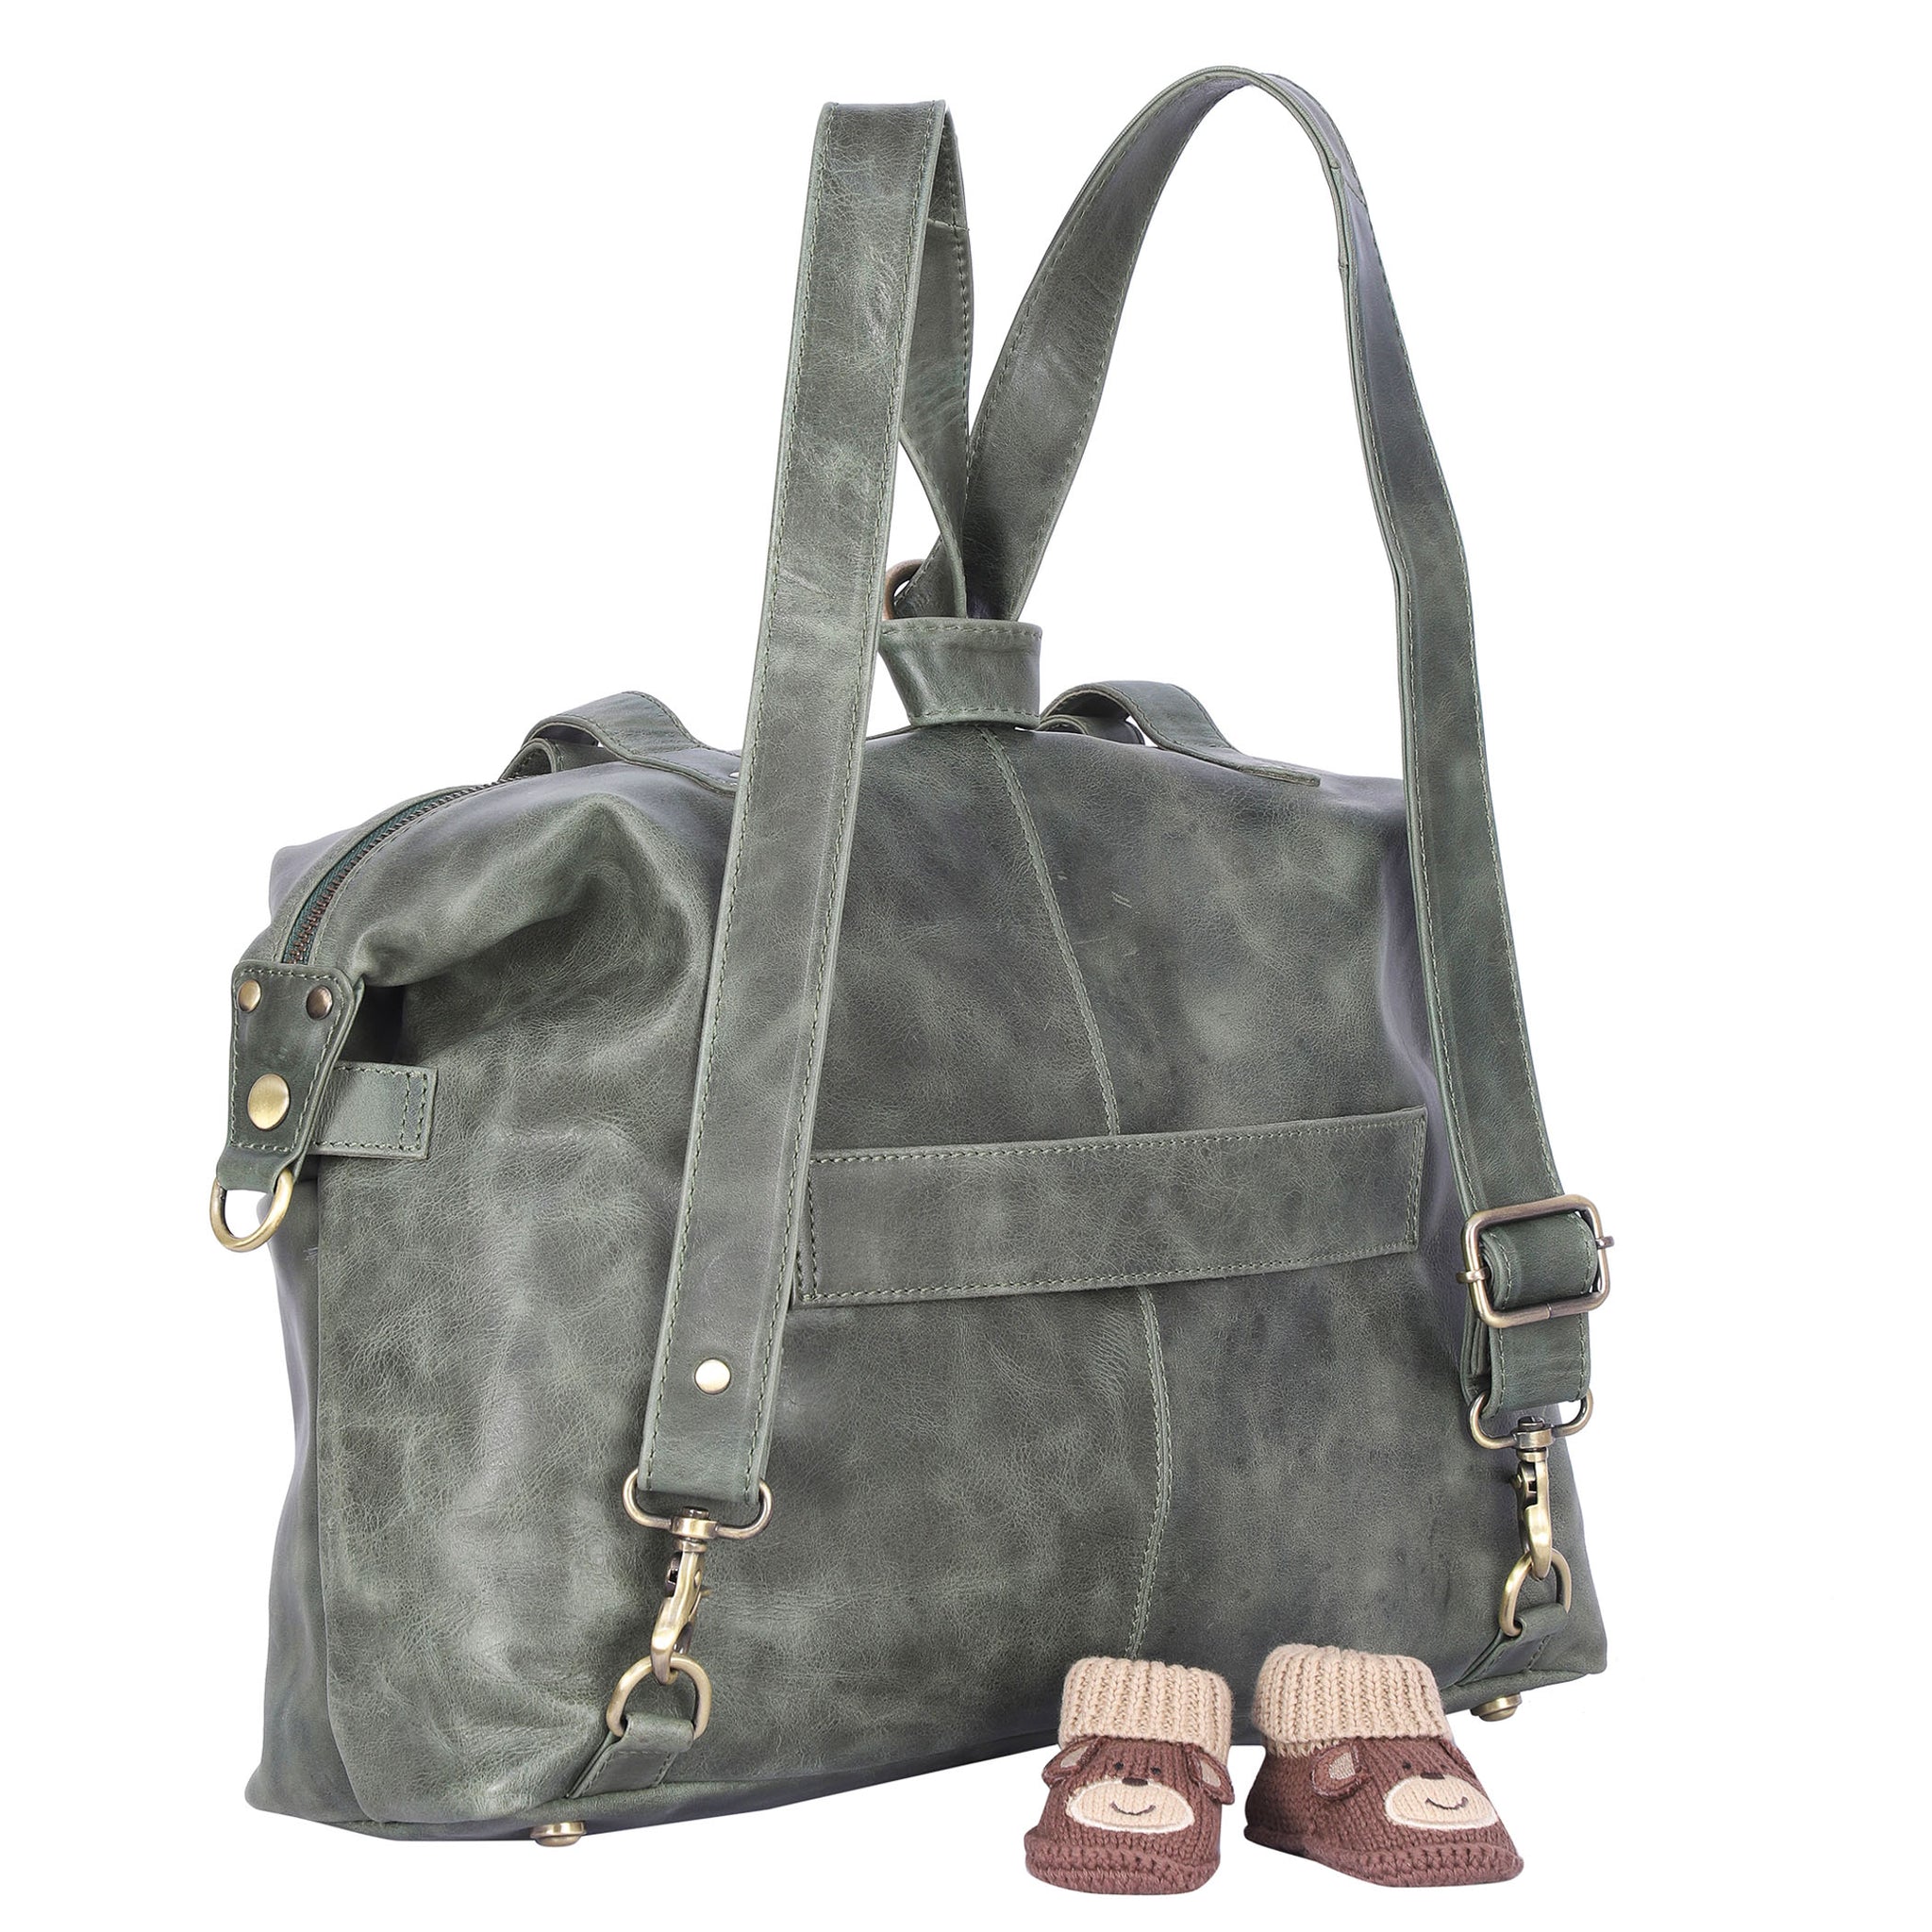 Paddock Convertible Backpack Purse in Pebbled Leather – Oughton